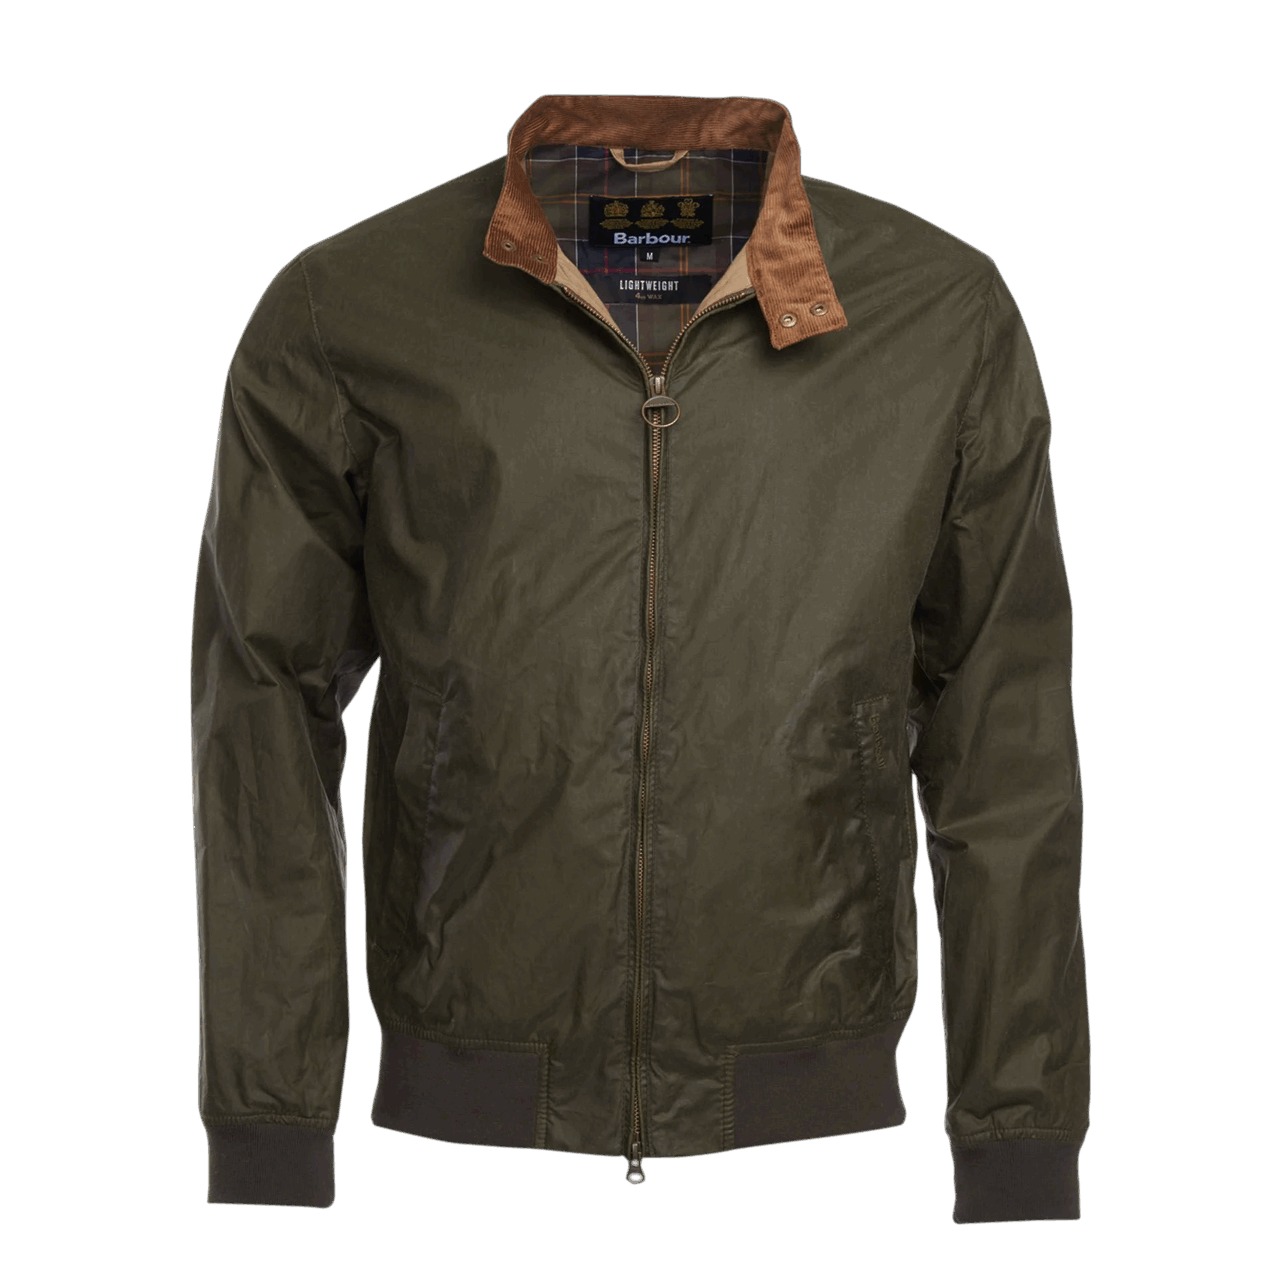 Barbour Royston Lightweight Wax Jacket - archive olive